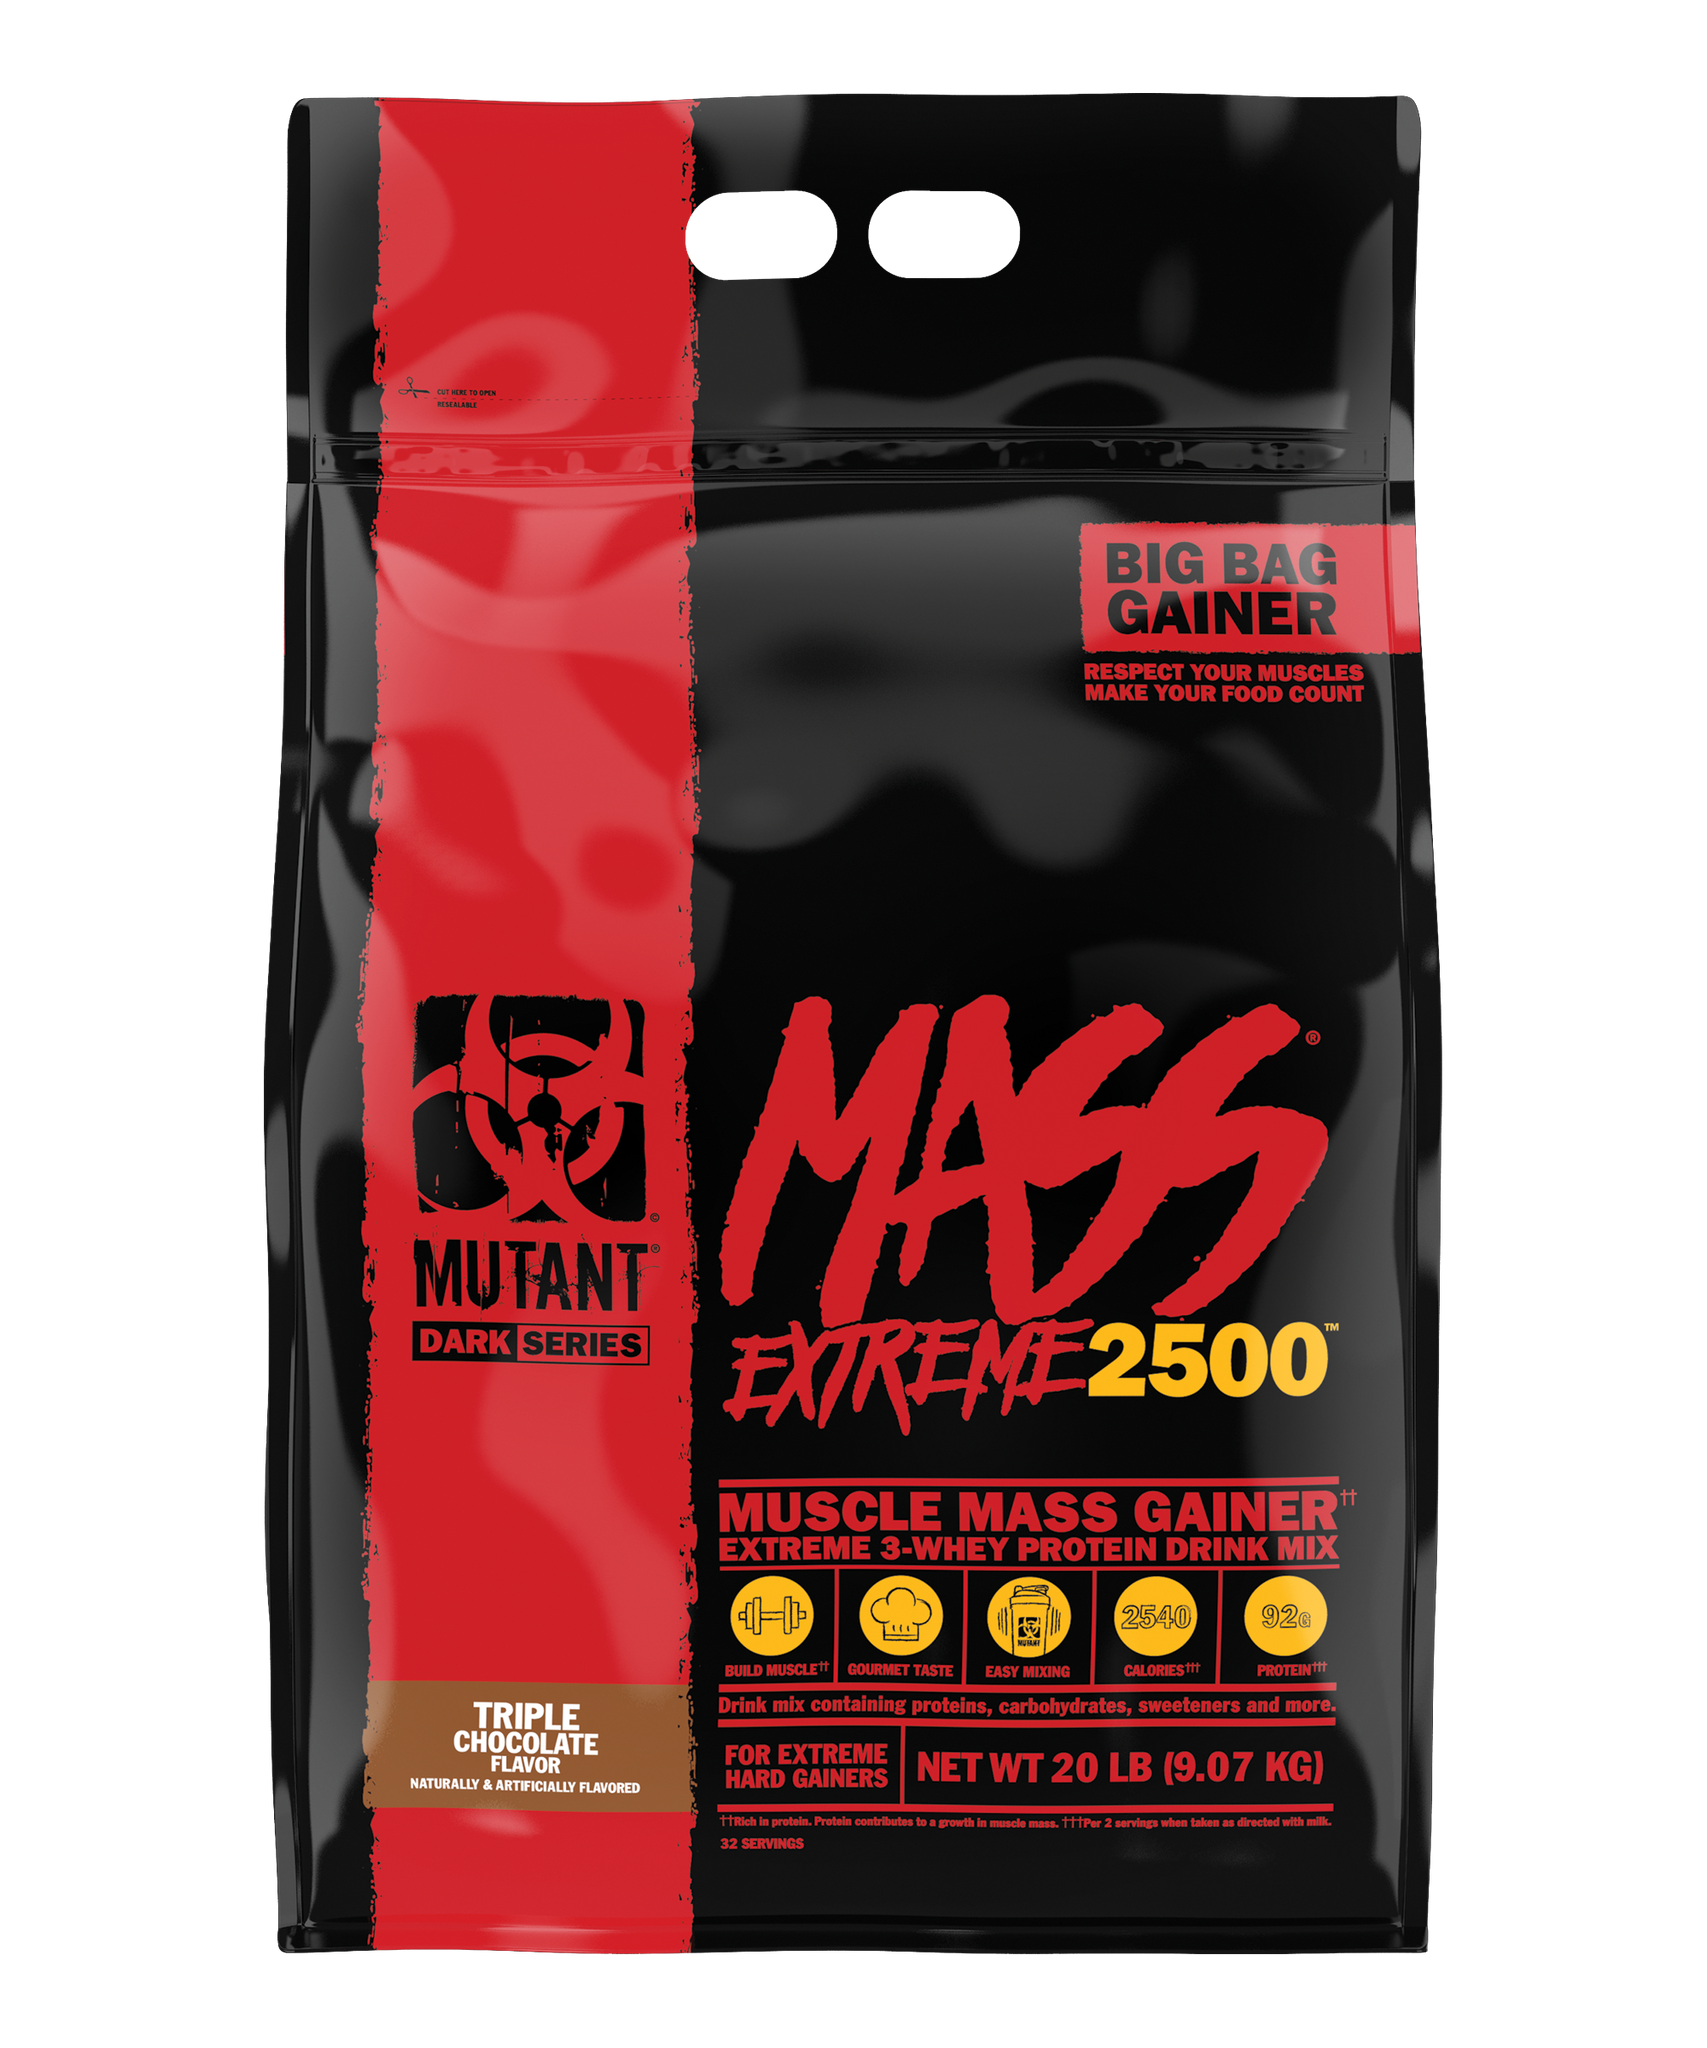 Mutant MASS EXTREME 2500, Mass Gainer For Extreme Hard Gainers - 20 lbs